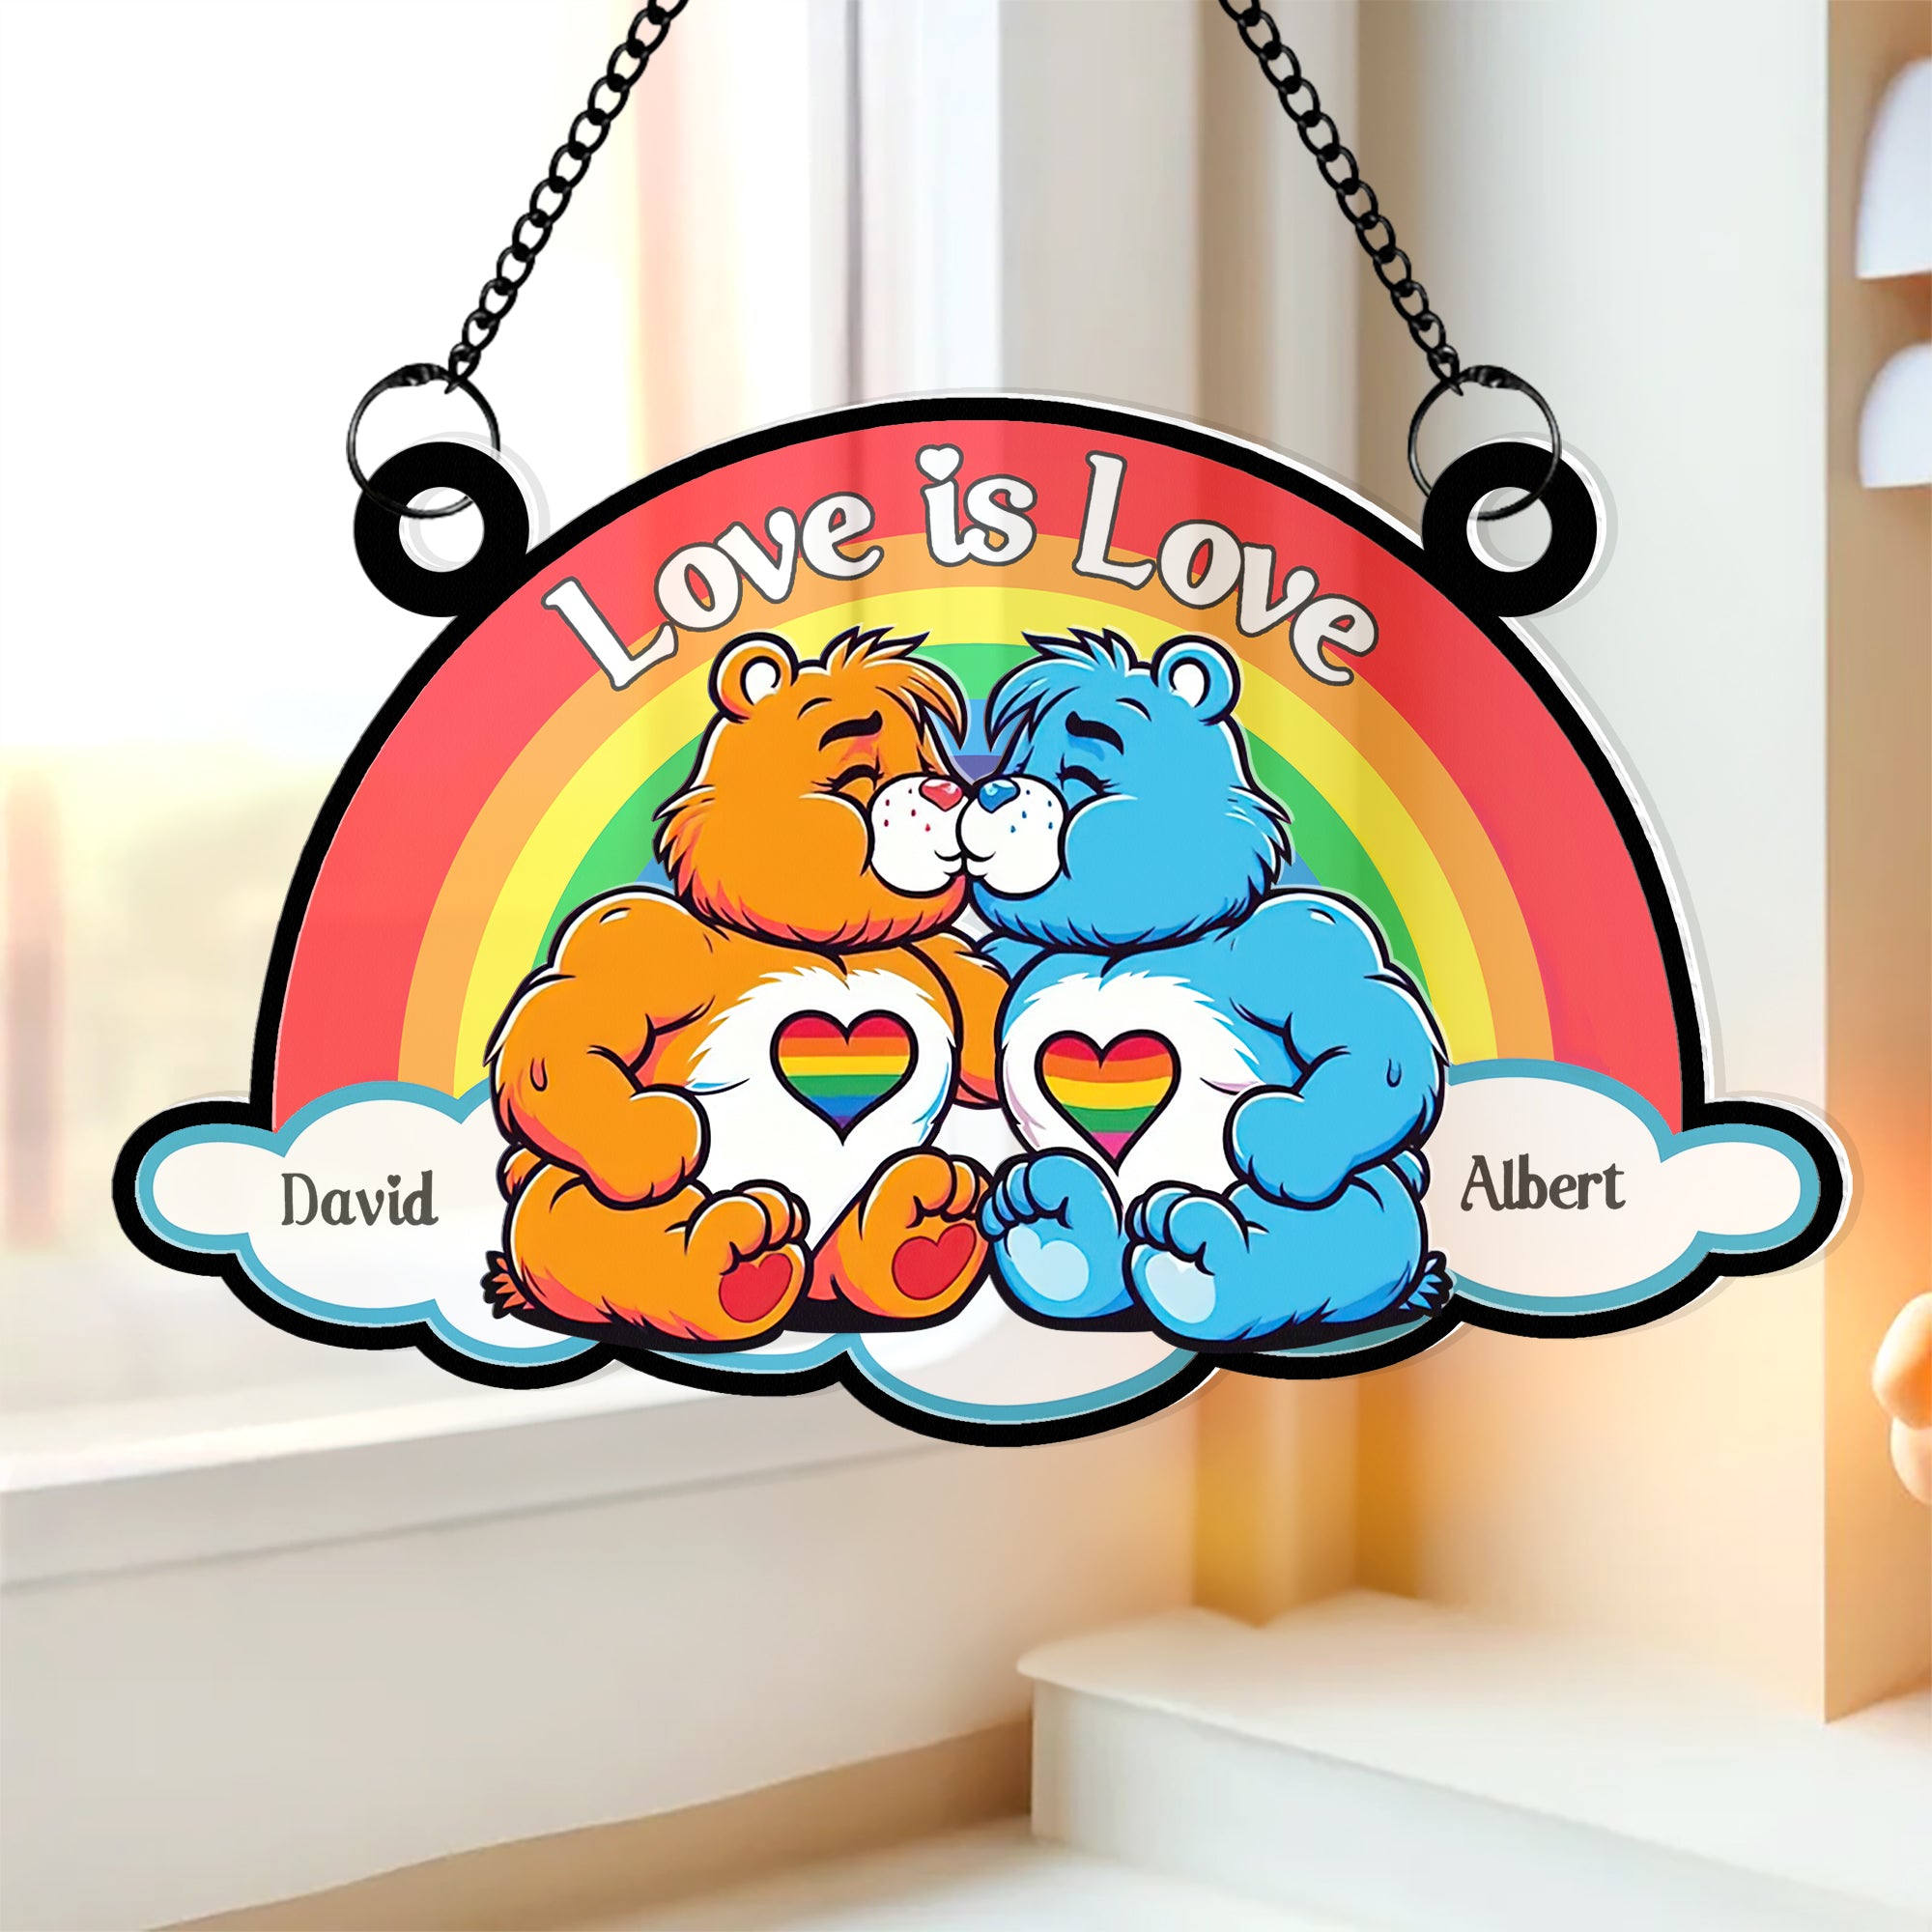 Personalized Gifts For Couple Suncatcher Ornament 01naqn180624-Homacus